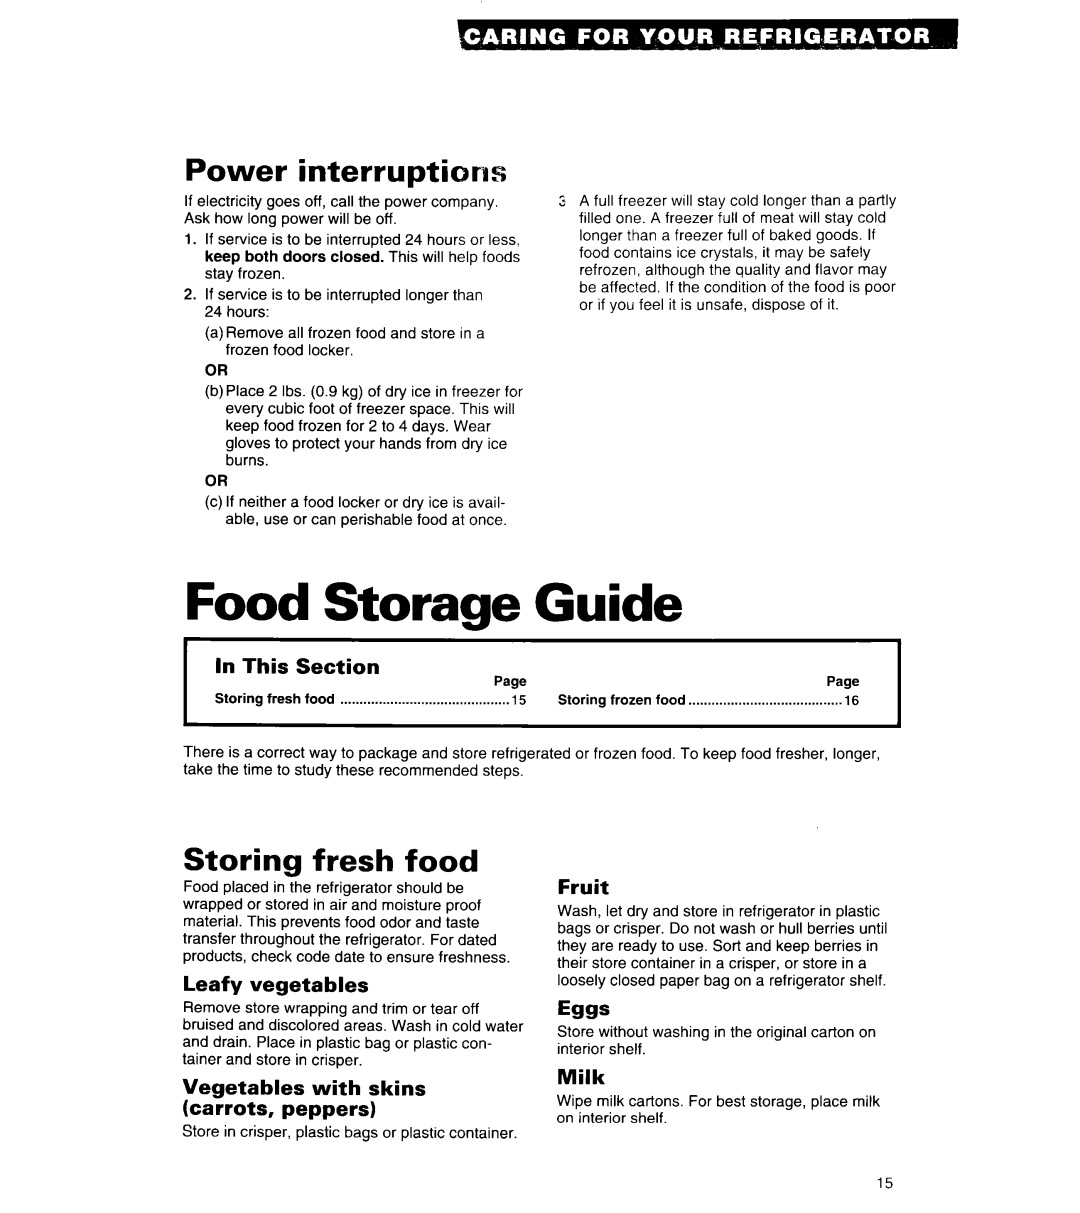 Whirlpool 6ET18ZK Guide, Food, Power interruptiards, Storing fresh food, Storage, In This, Section, Leafy vegetables, Milk 